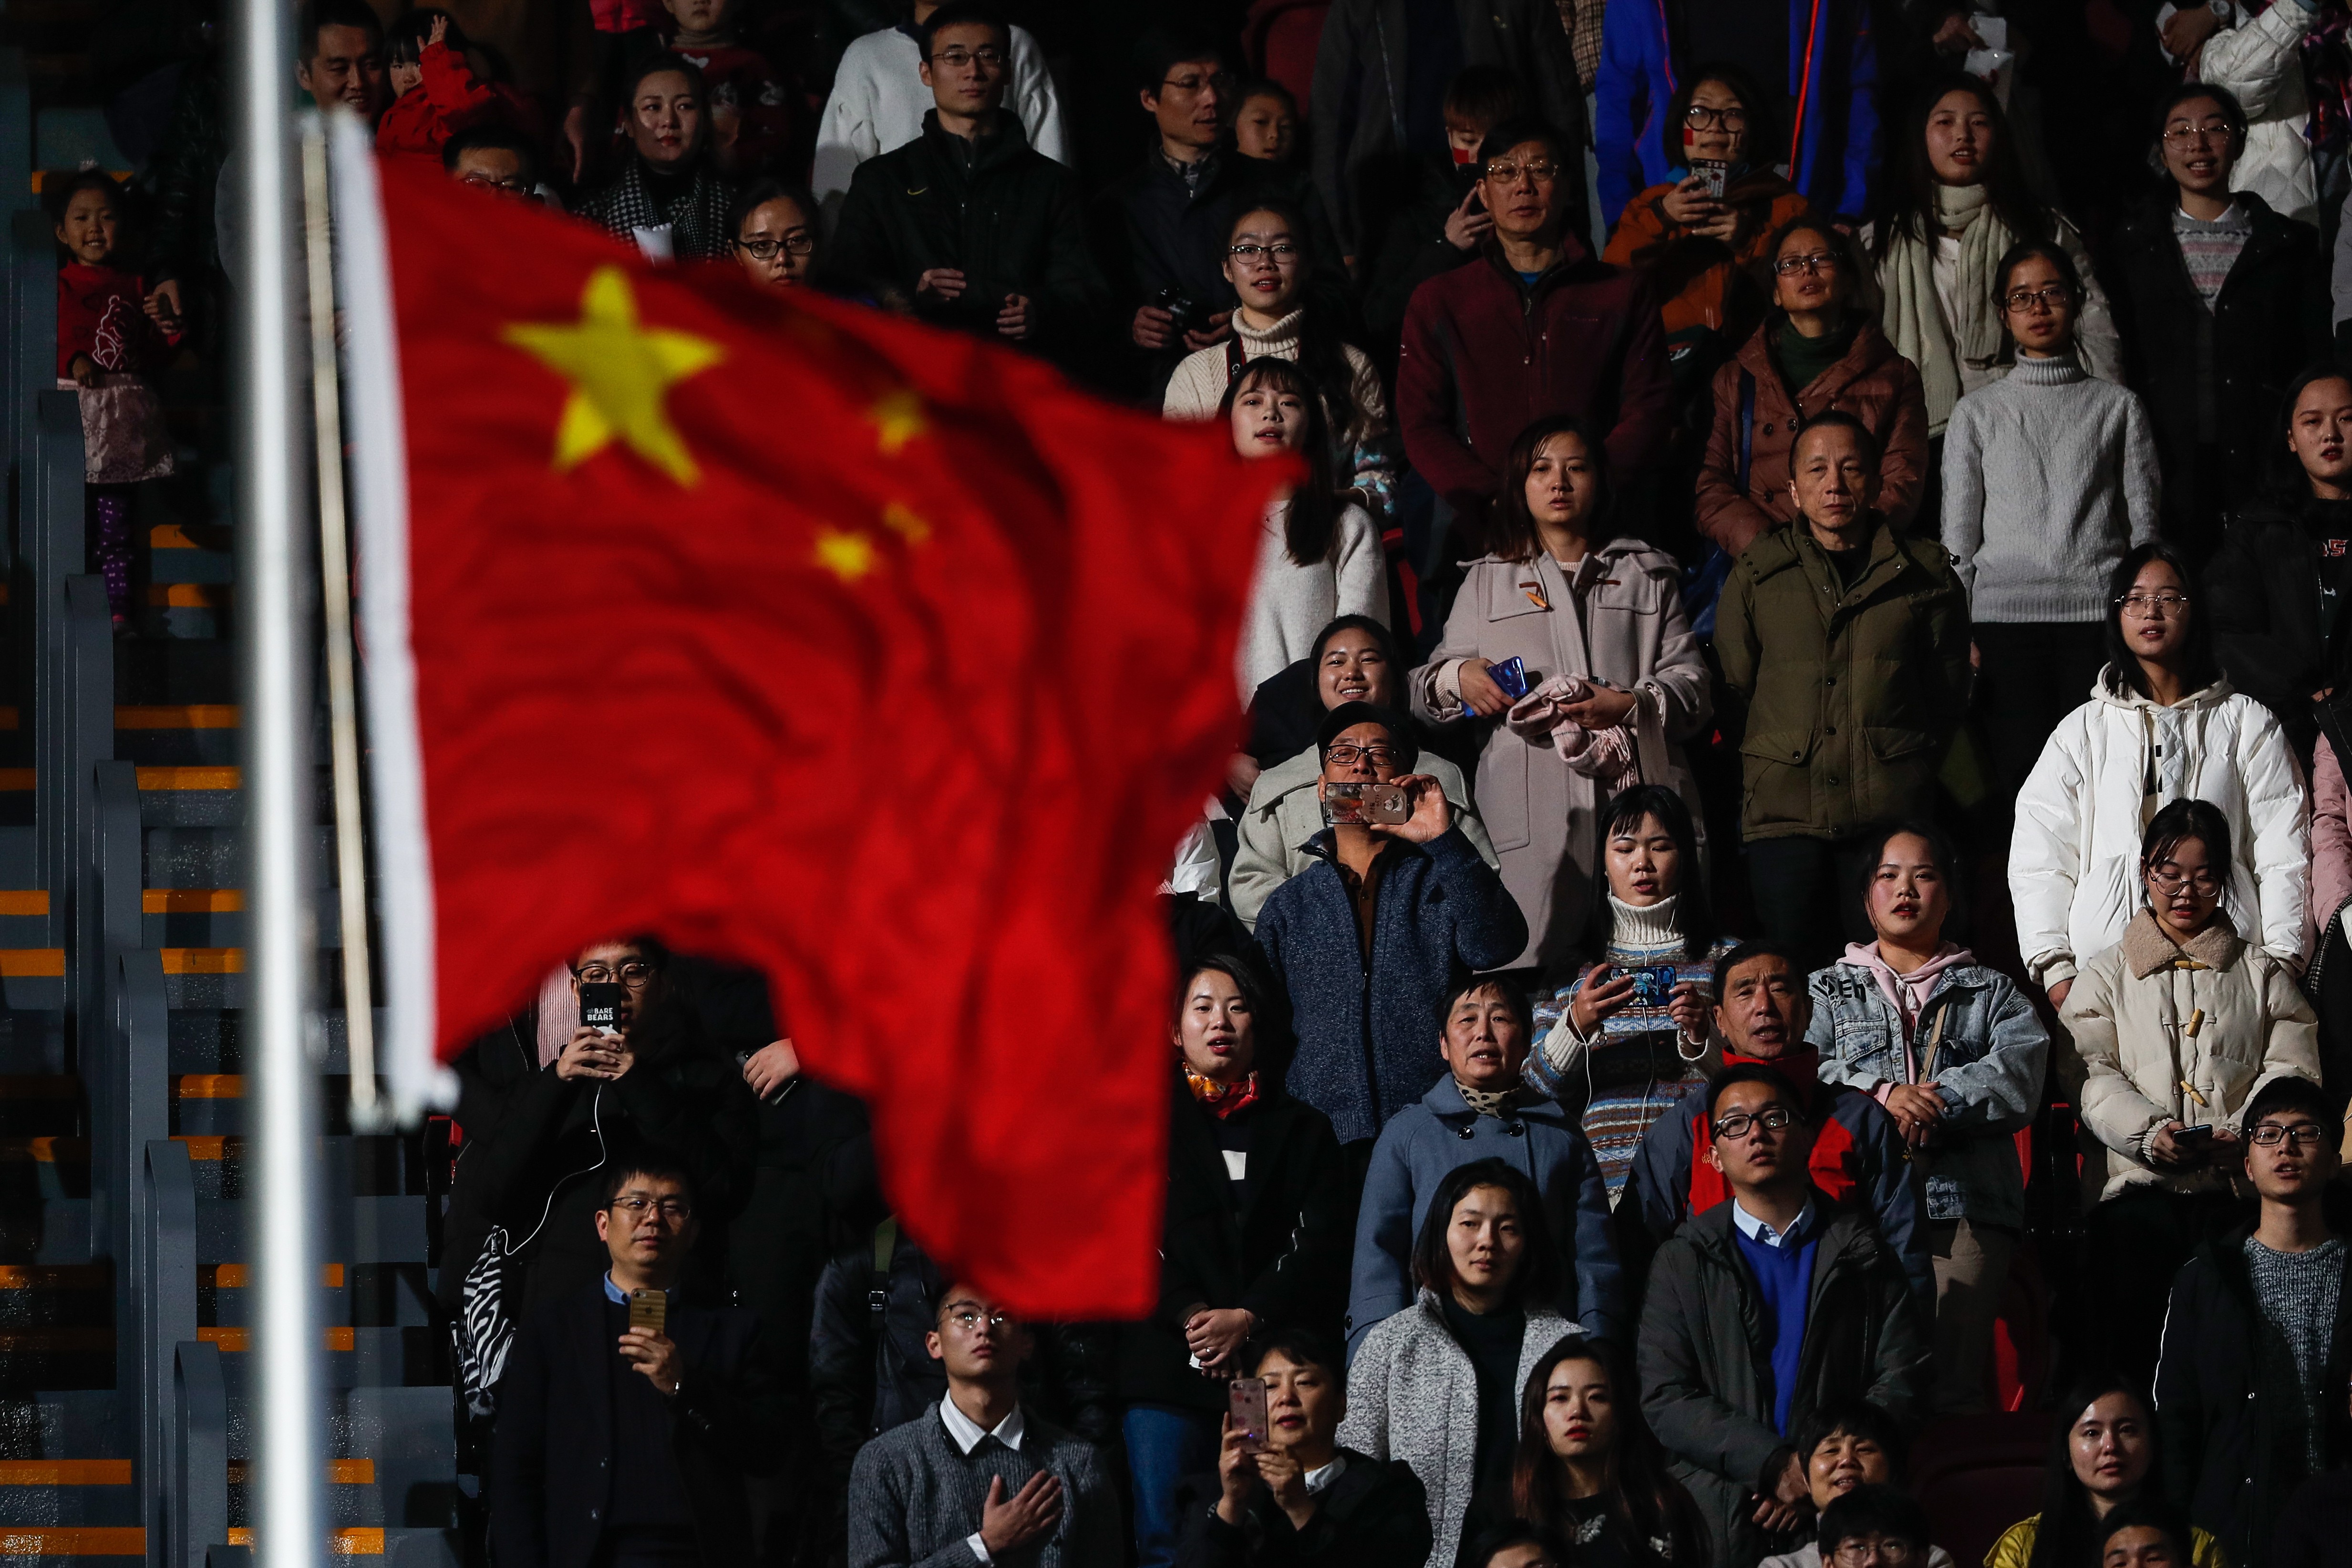 Chinese citizens look at their flag as they sing their national anthem during the opening ceremony of the FINA Swimming Short Course World Championships in Hangzhou on December 11. Photo: EPA-EFE